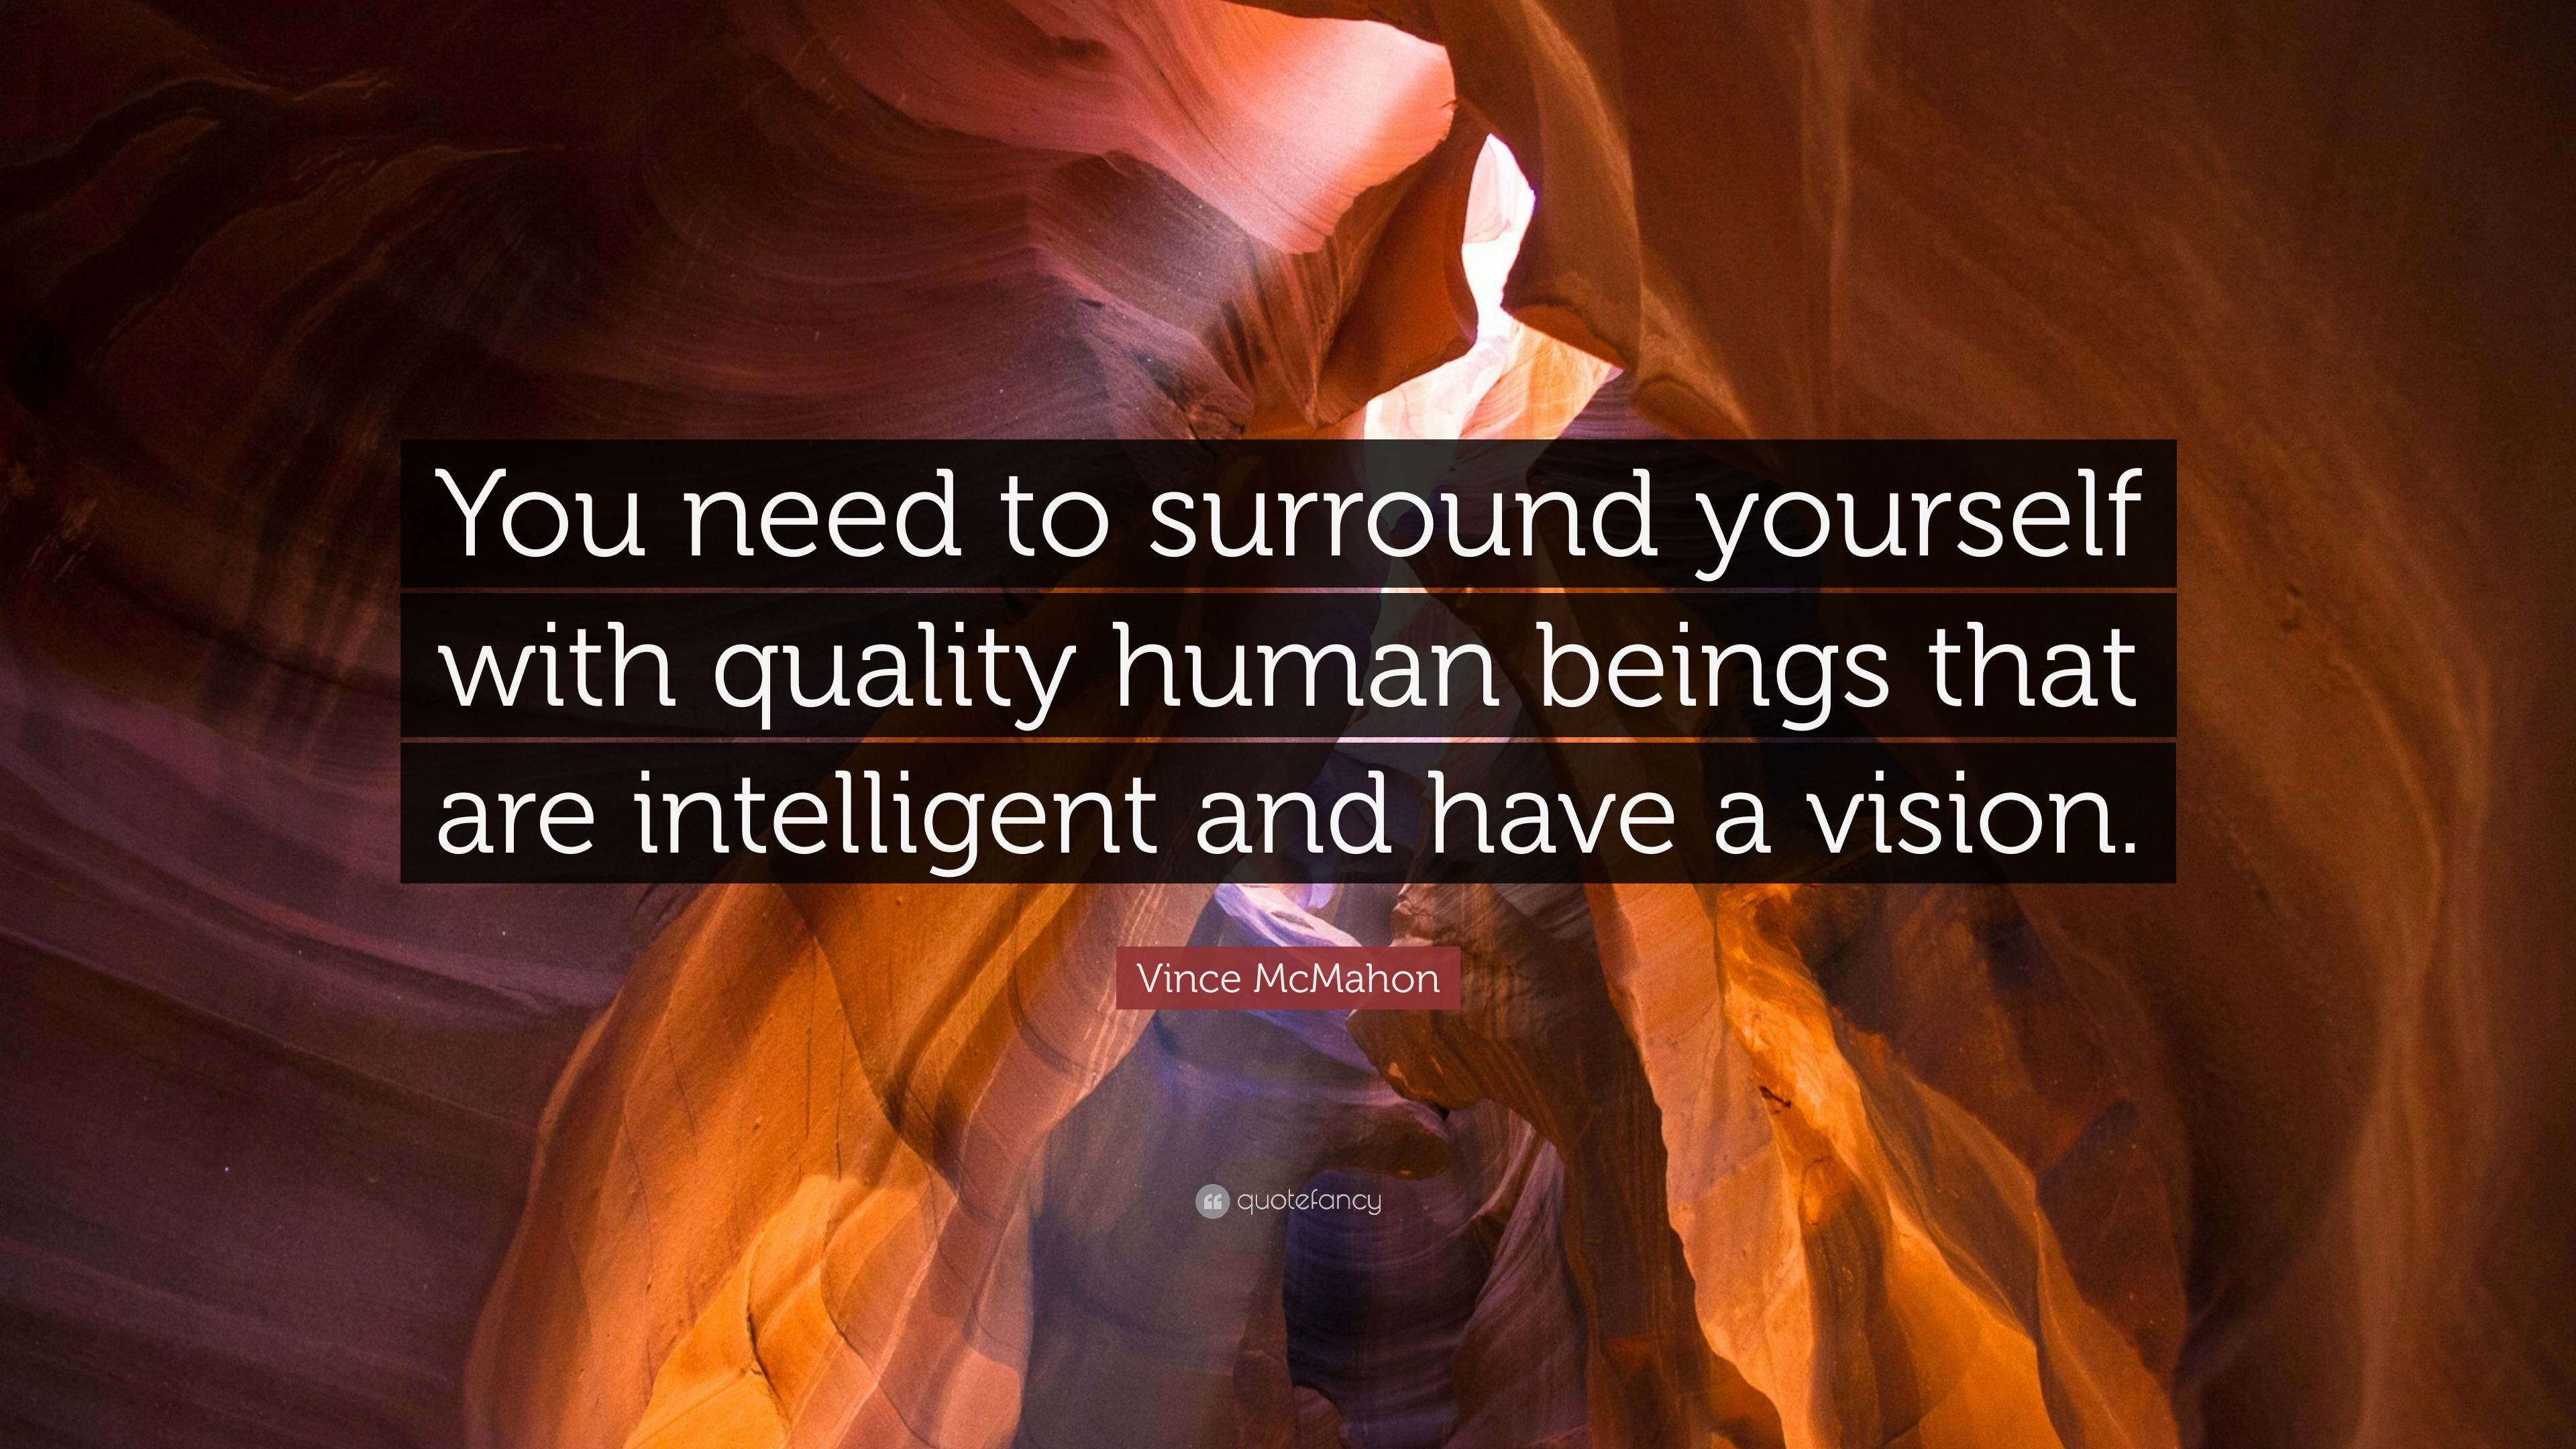 Vince McMahon Quote: “You need to surround yourself with quality